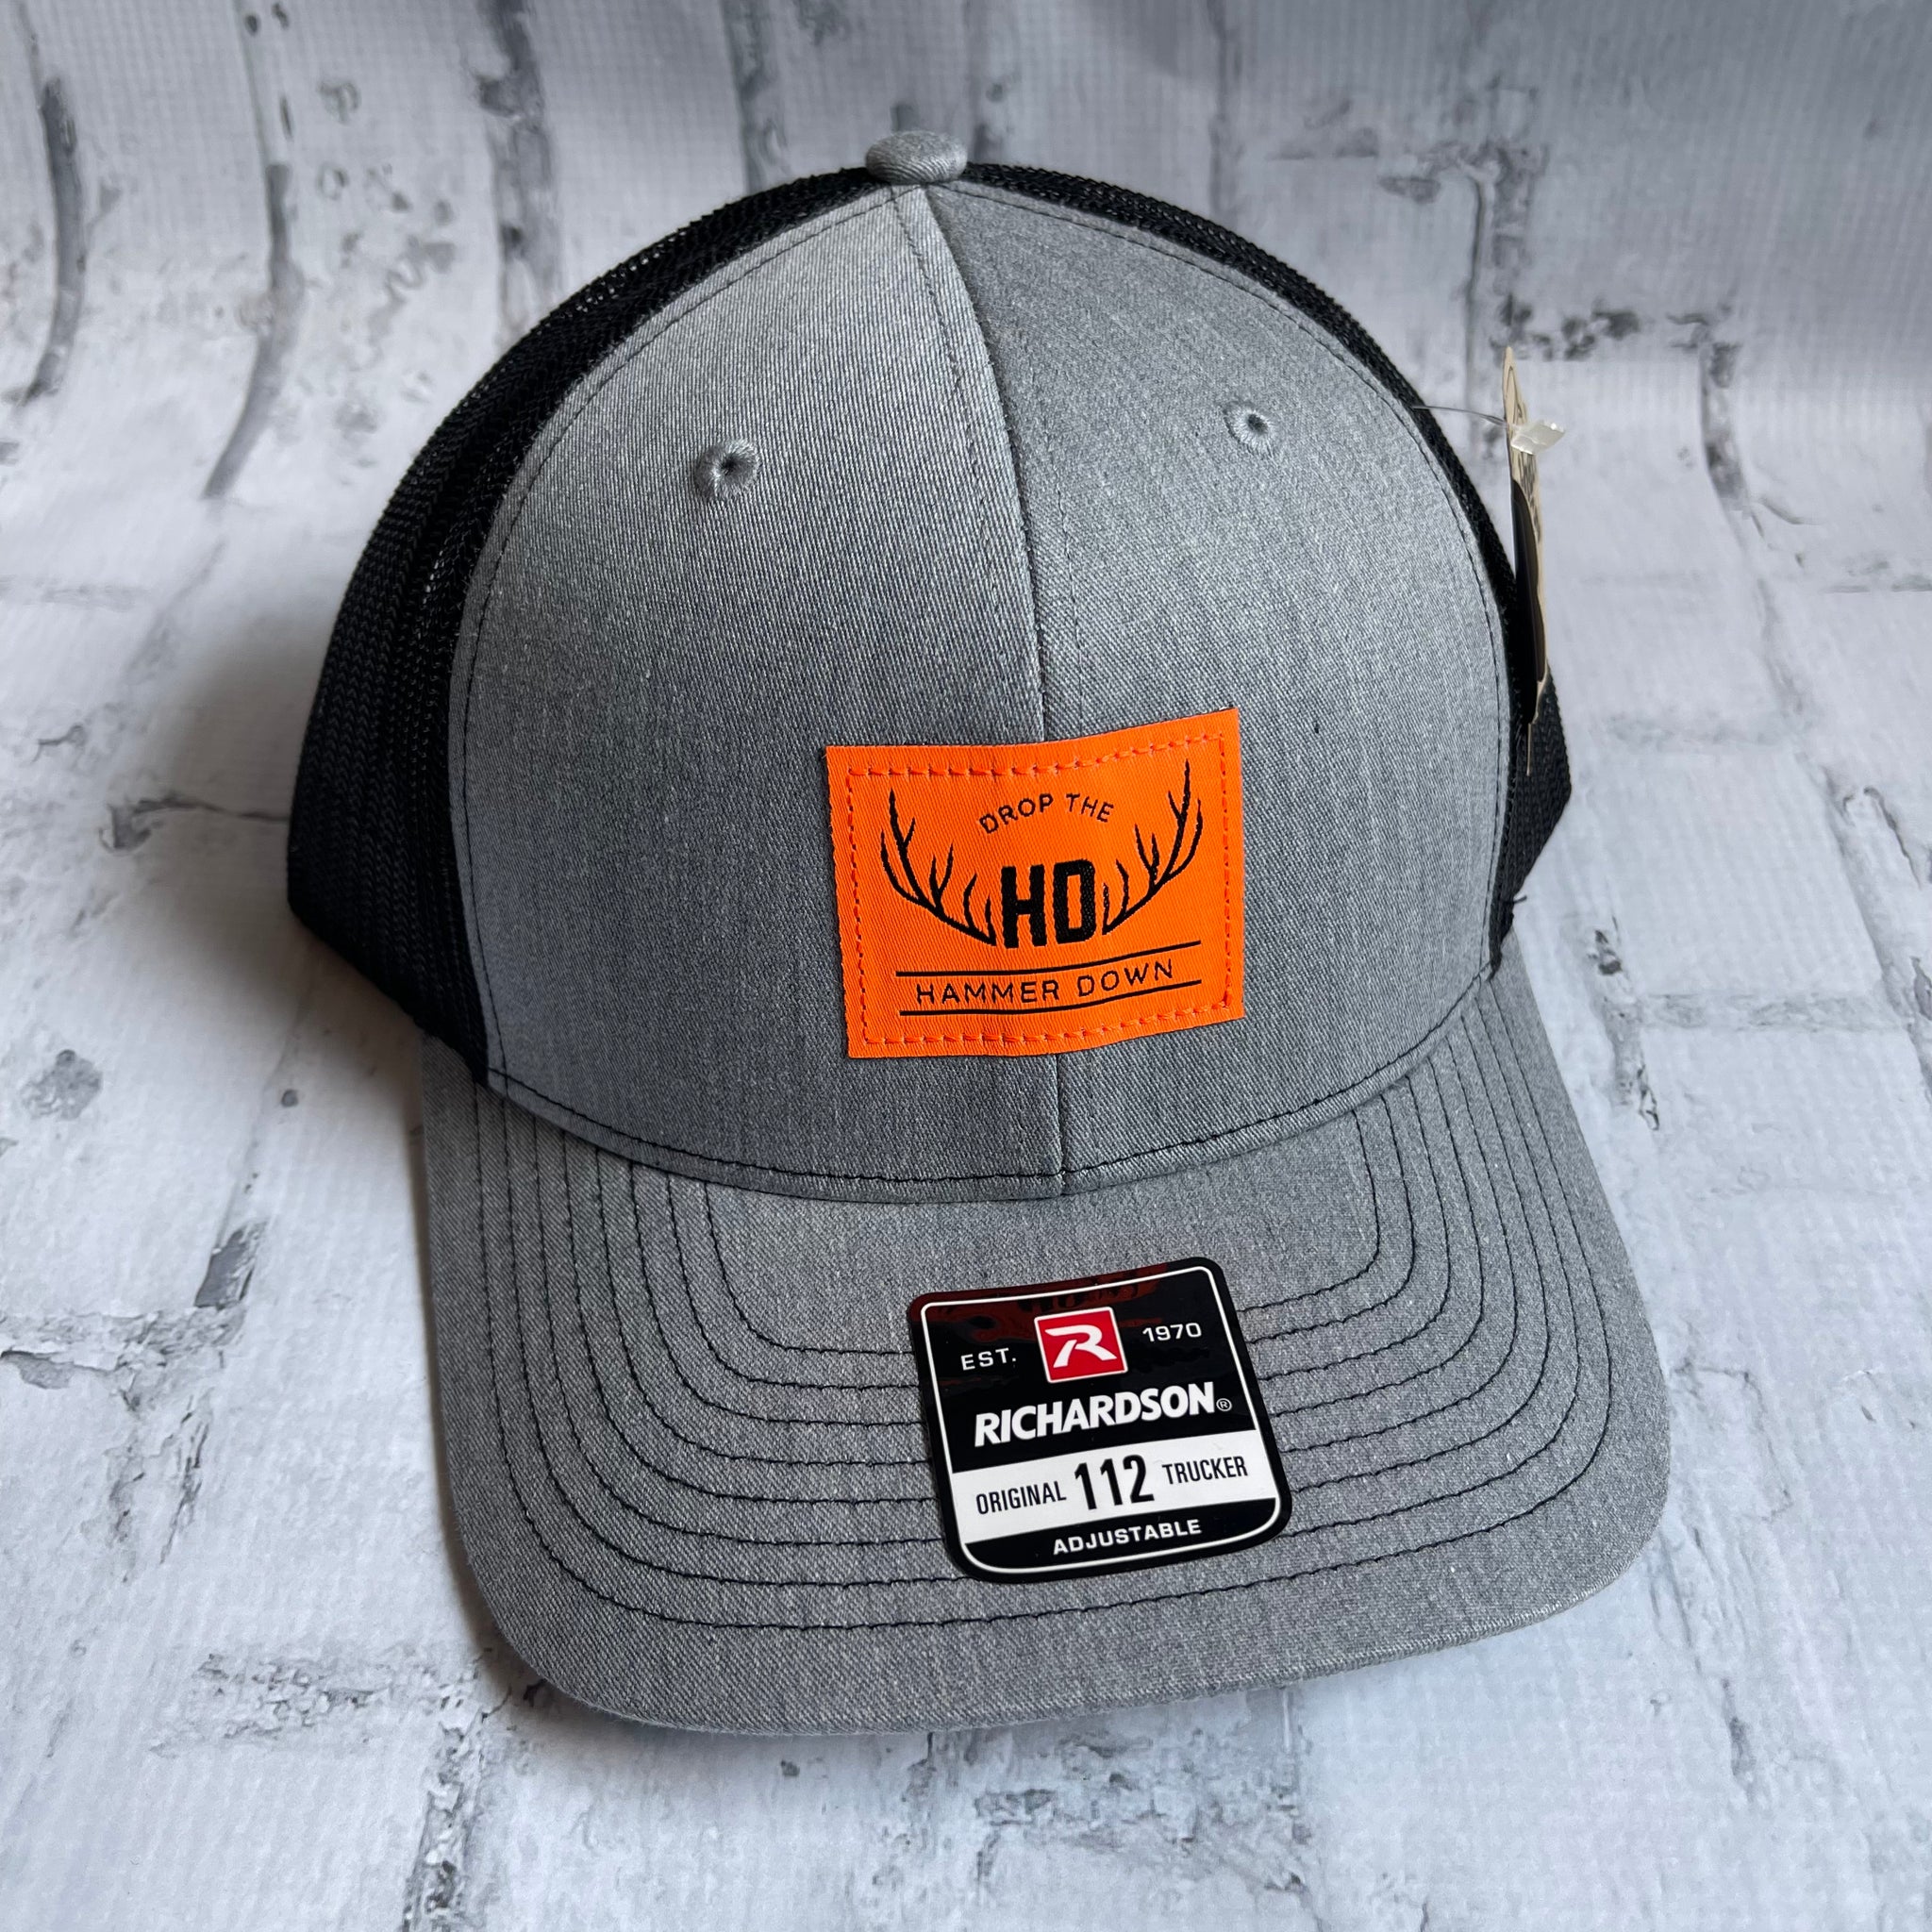 Hammer Down "Orange DTH Antlers" Hat - Heather Gray with Leather Patch - Southern Charm "Shop The Charm"